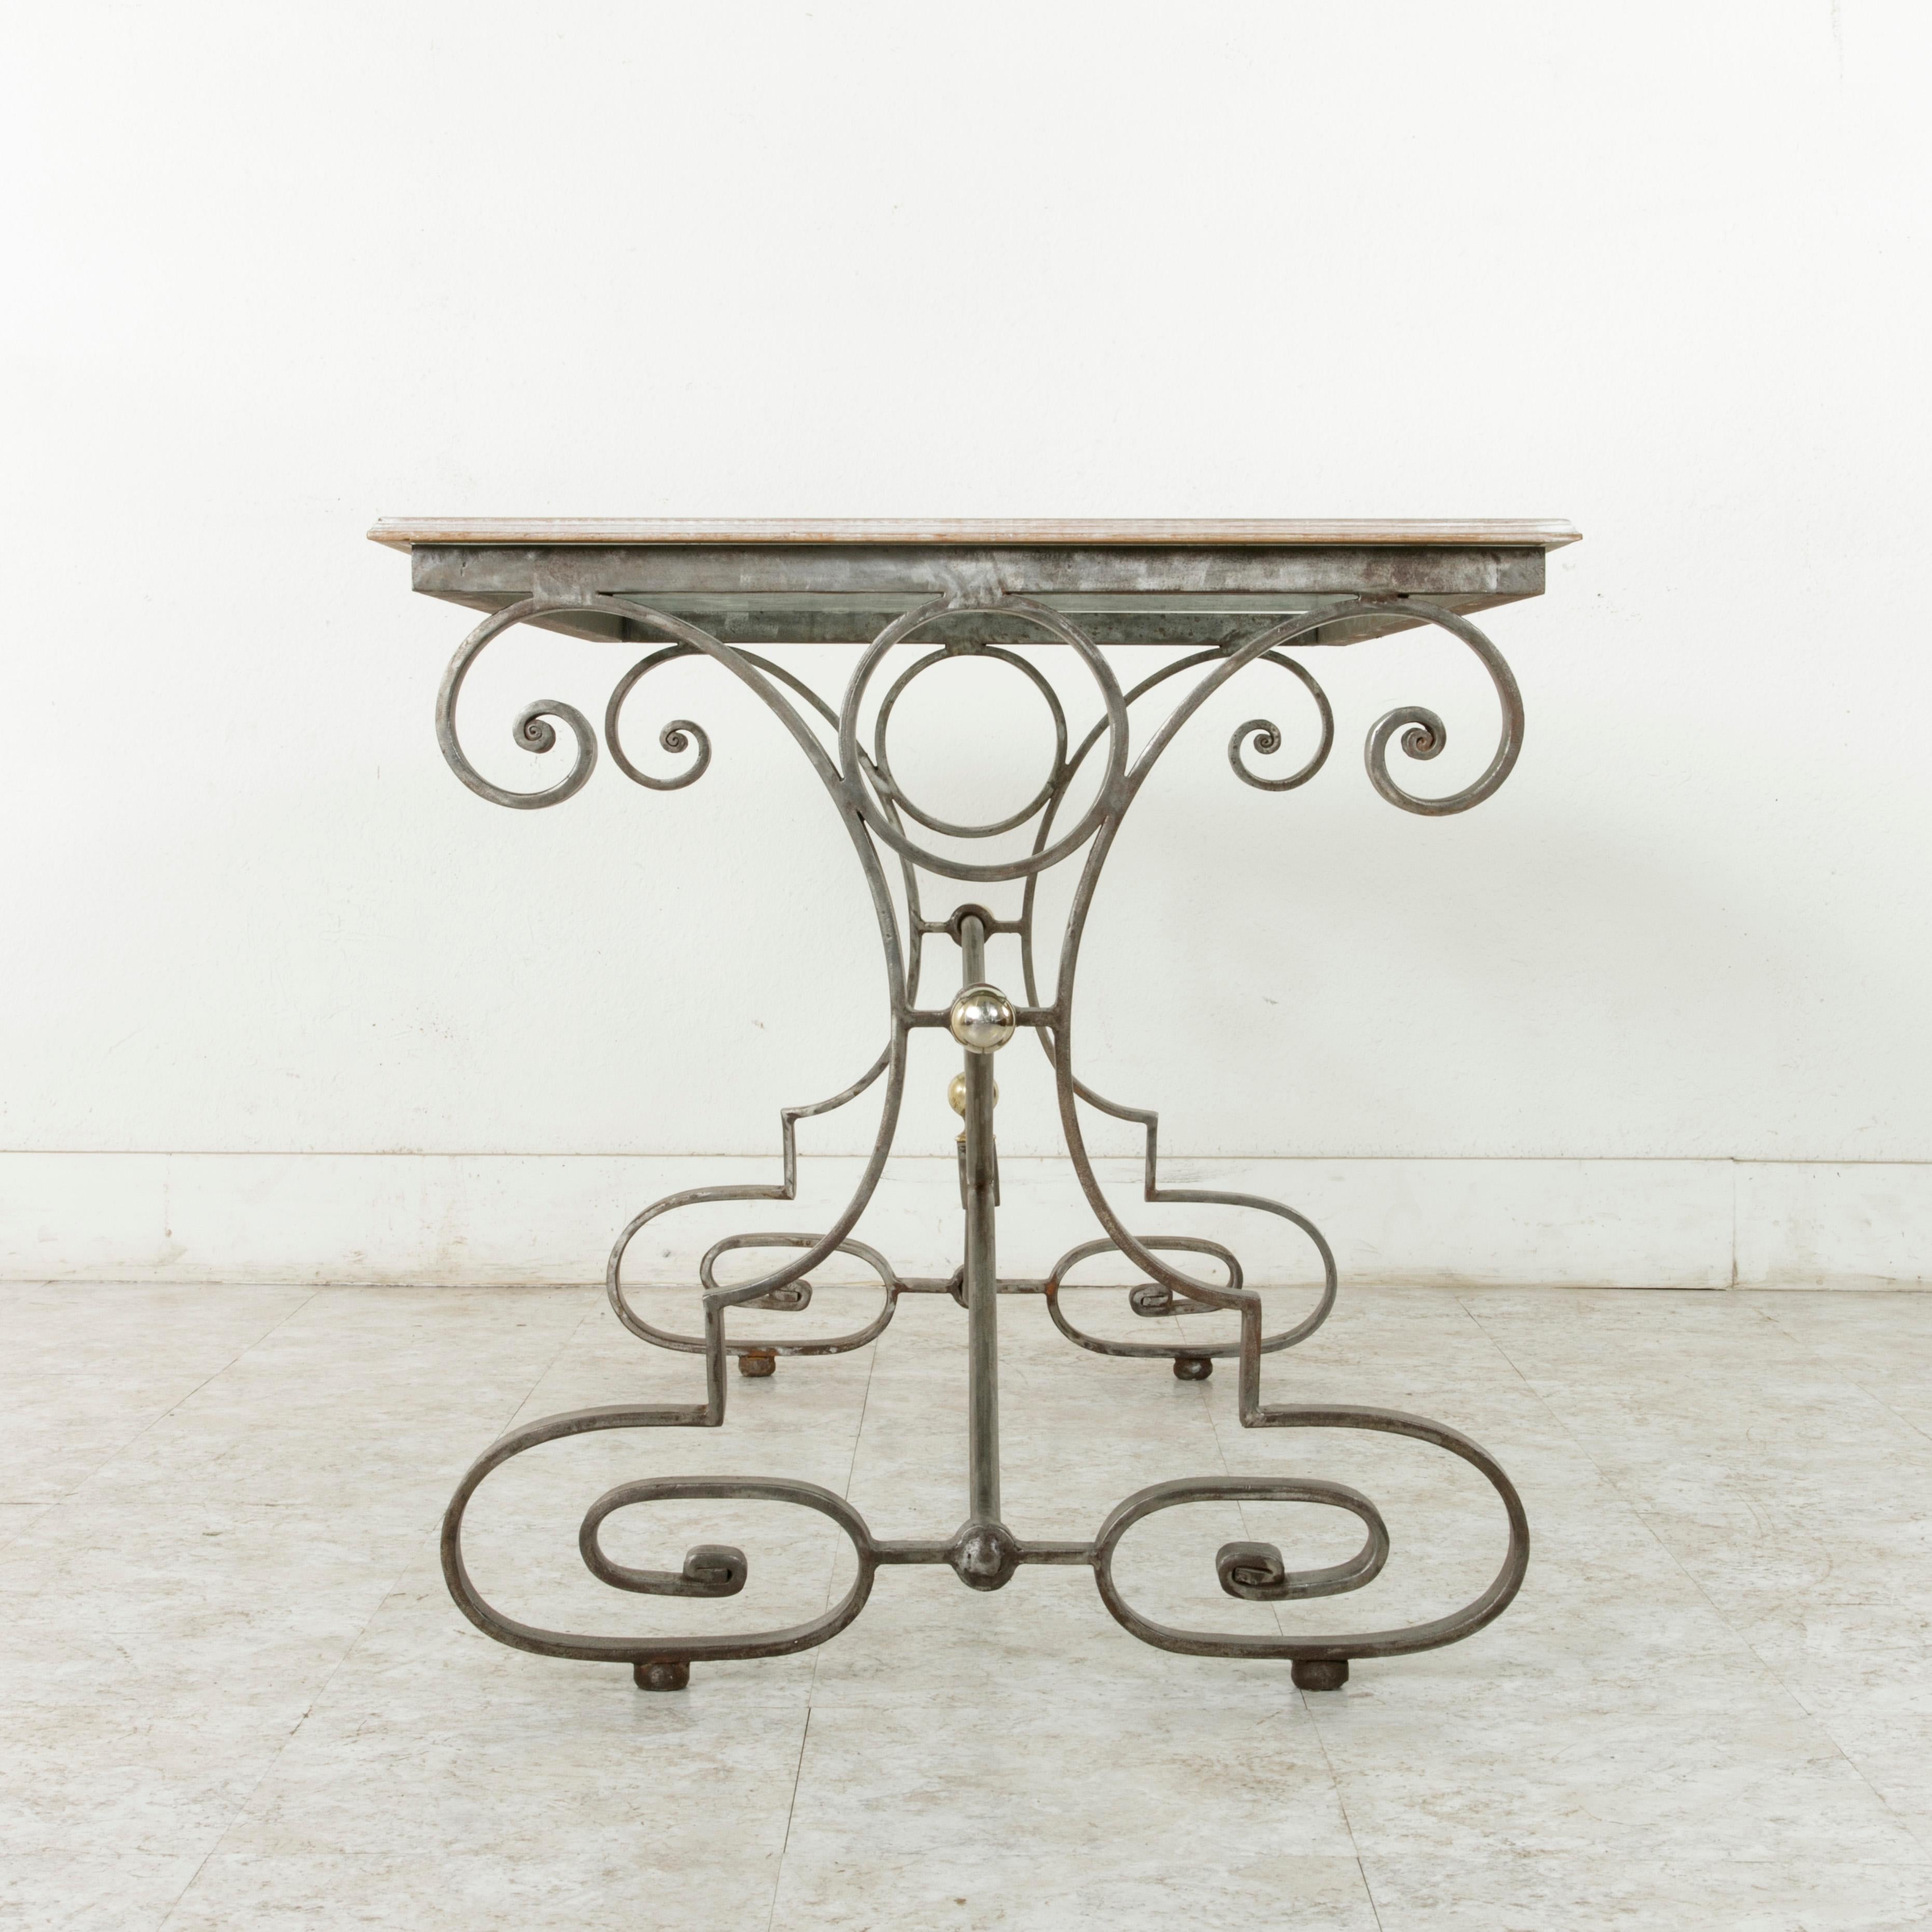 Painted Mid 20th Century French Wrought Iron and Bronze Outdoor Dining Table, Glass Top